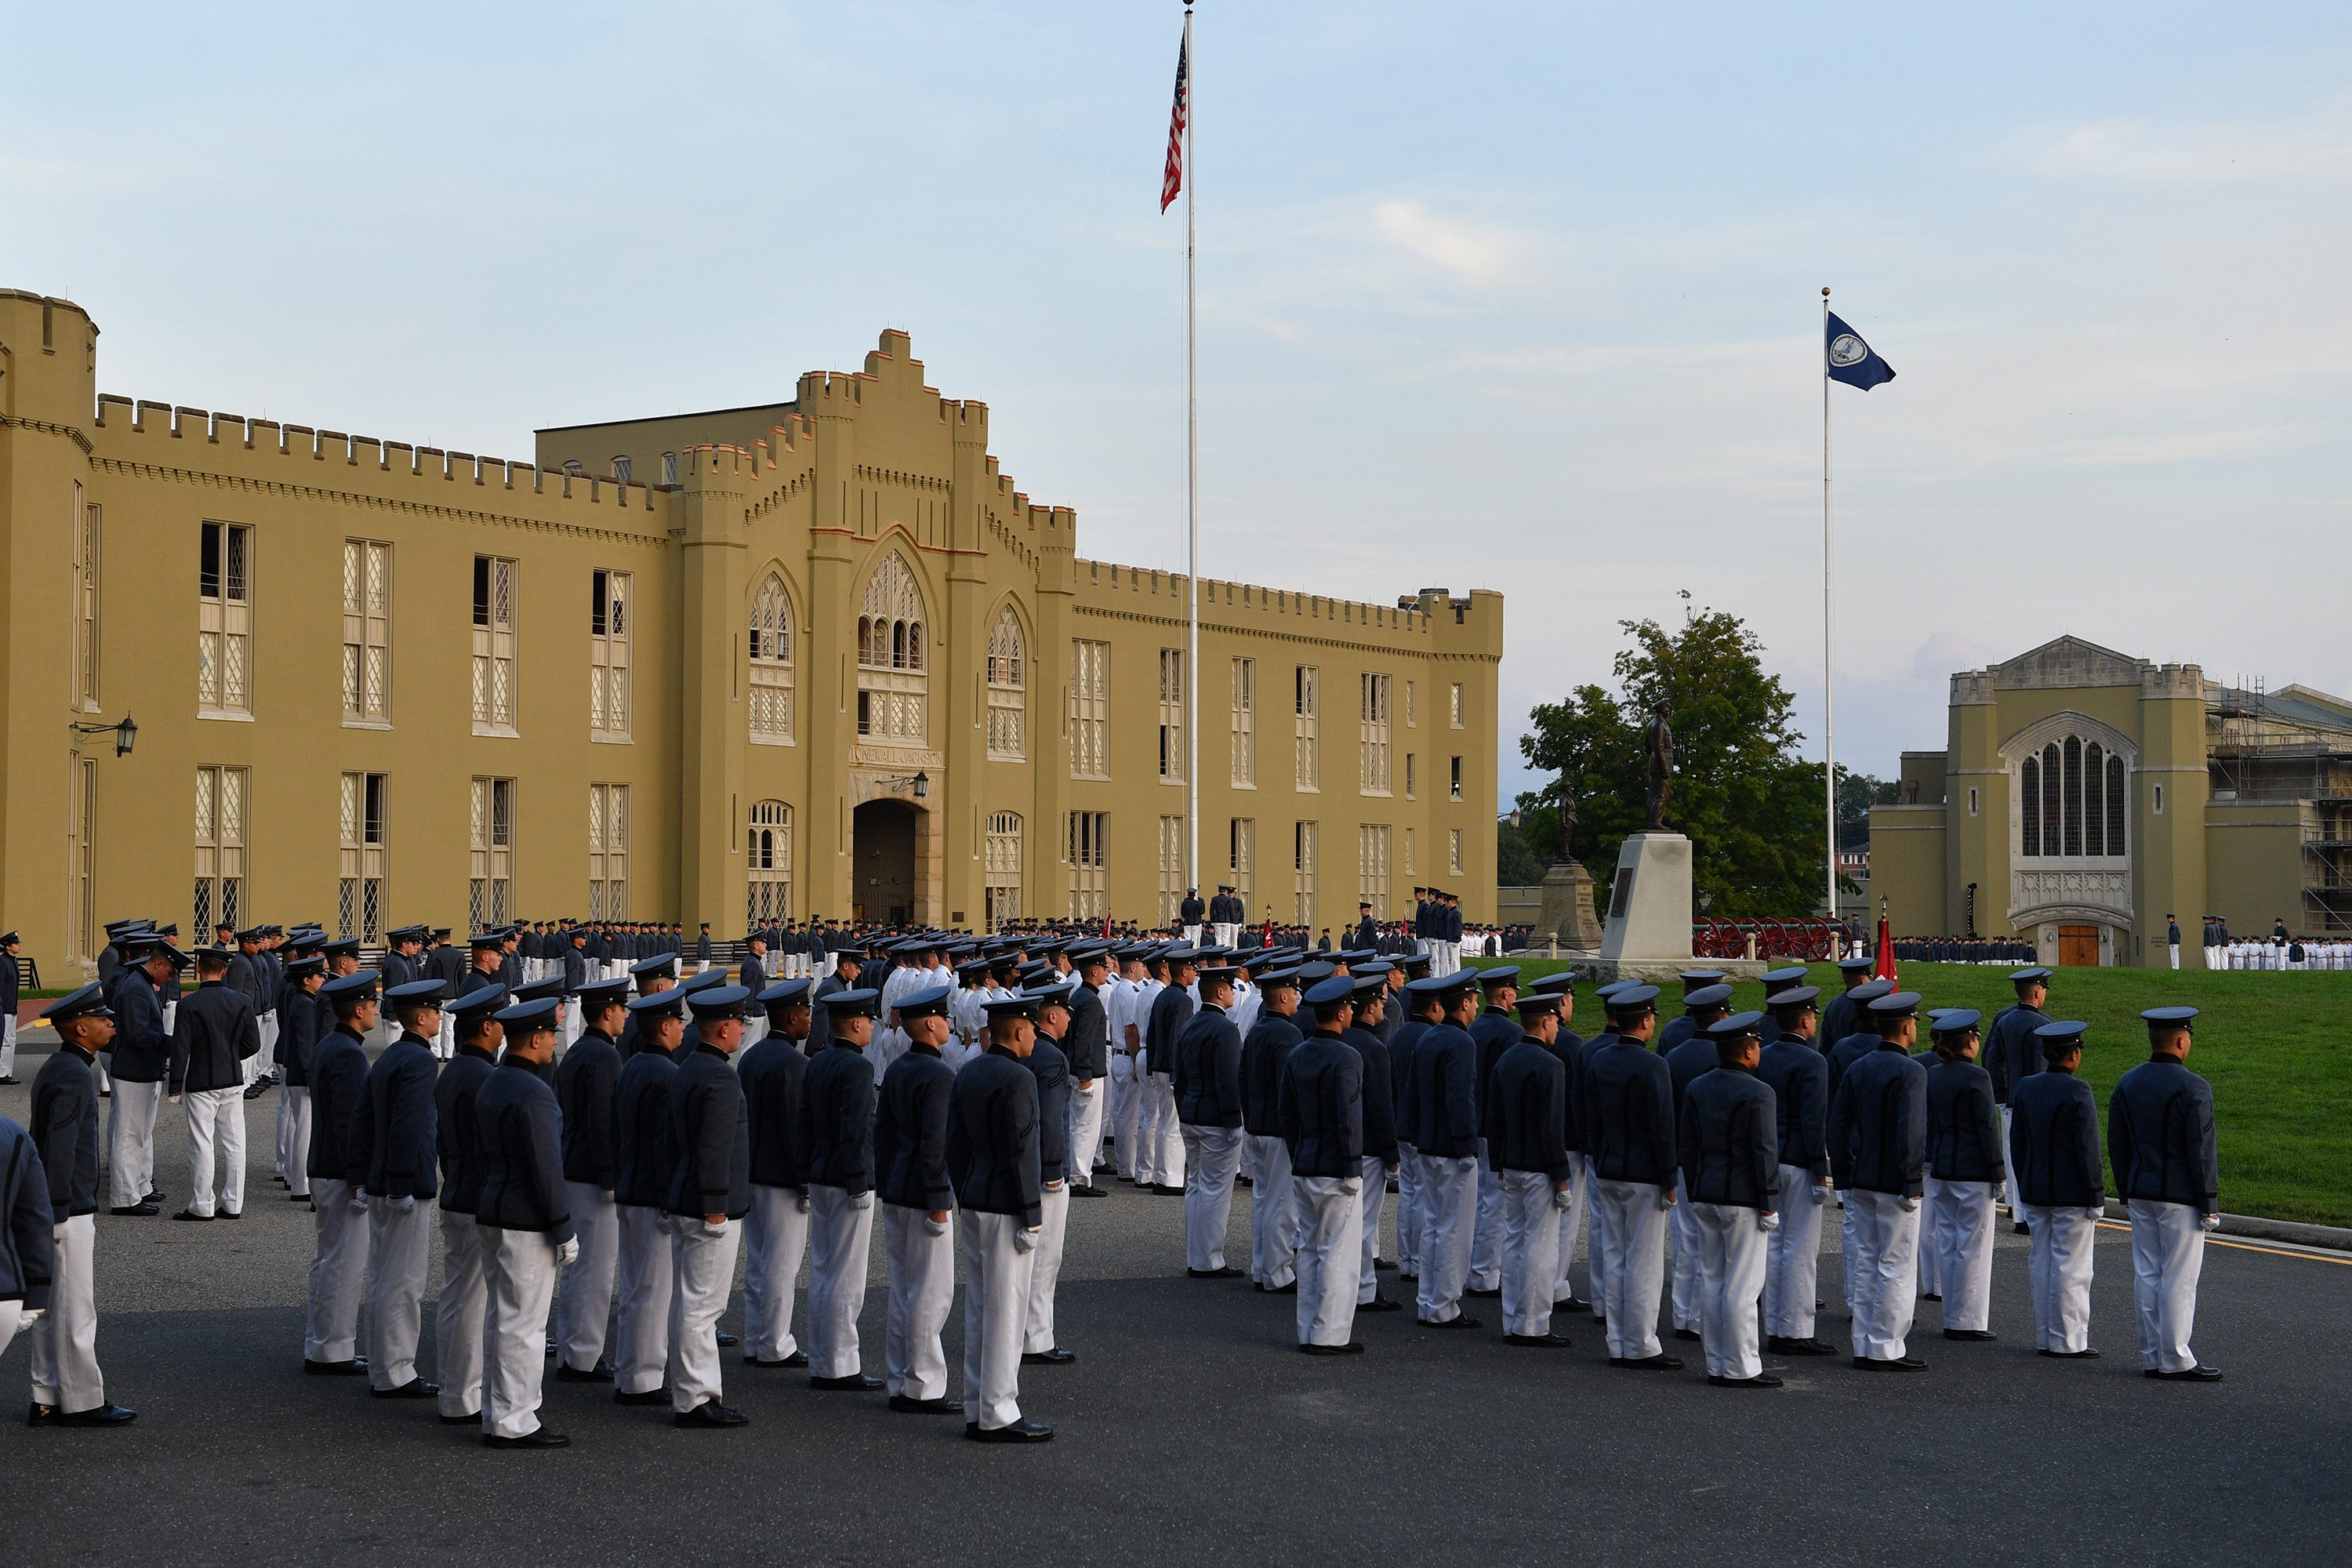 Cadets in formation in front of barracks